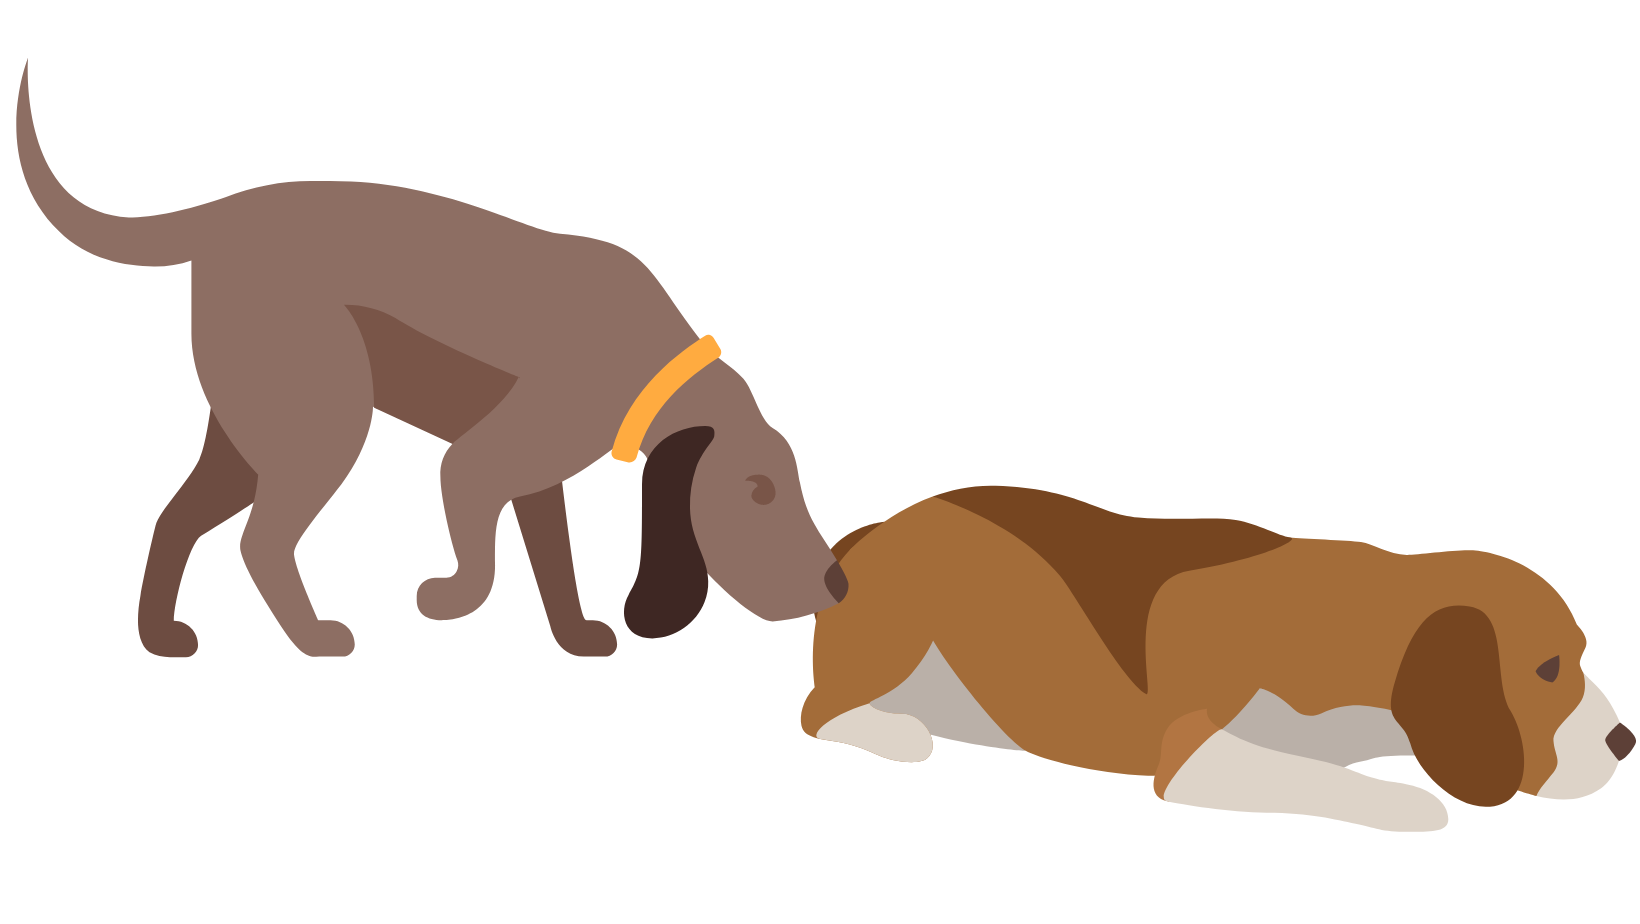 dogs have anal glands to communicate with each other